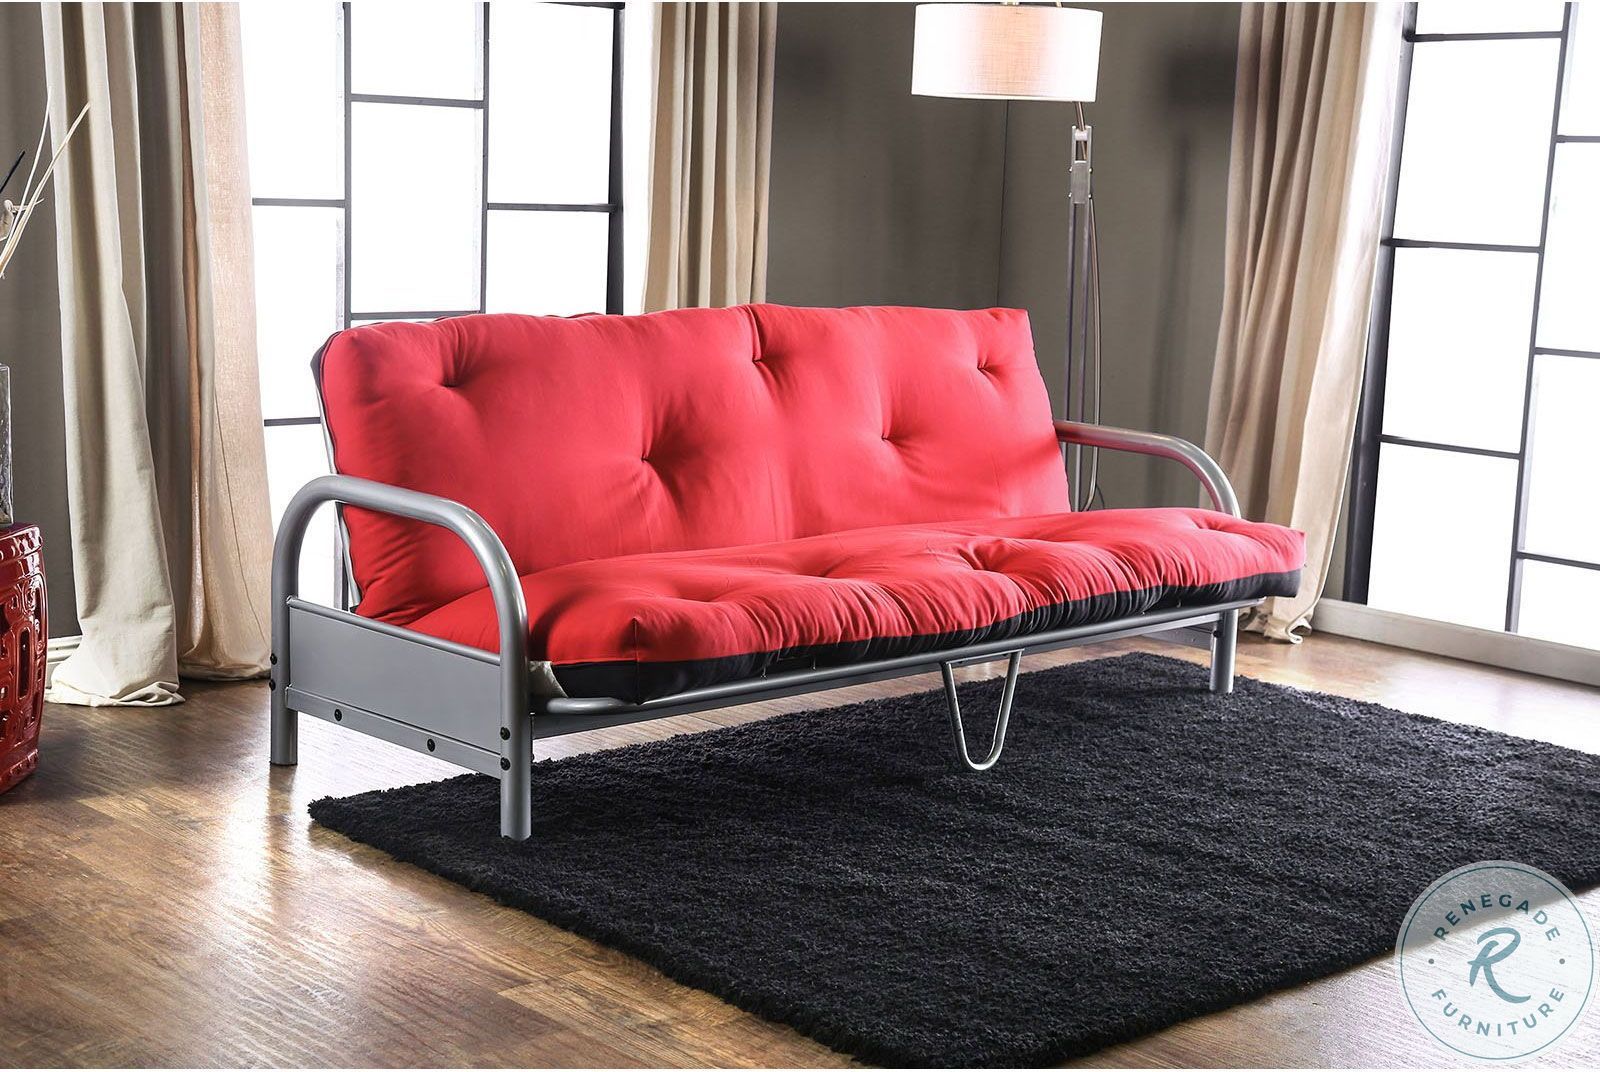 Aksel Black and Red Futon Mattress – Stylish, Comfortable, Durable